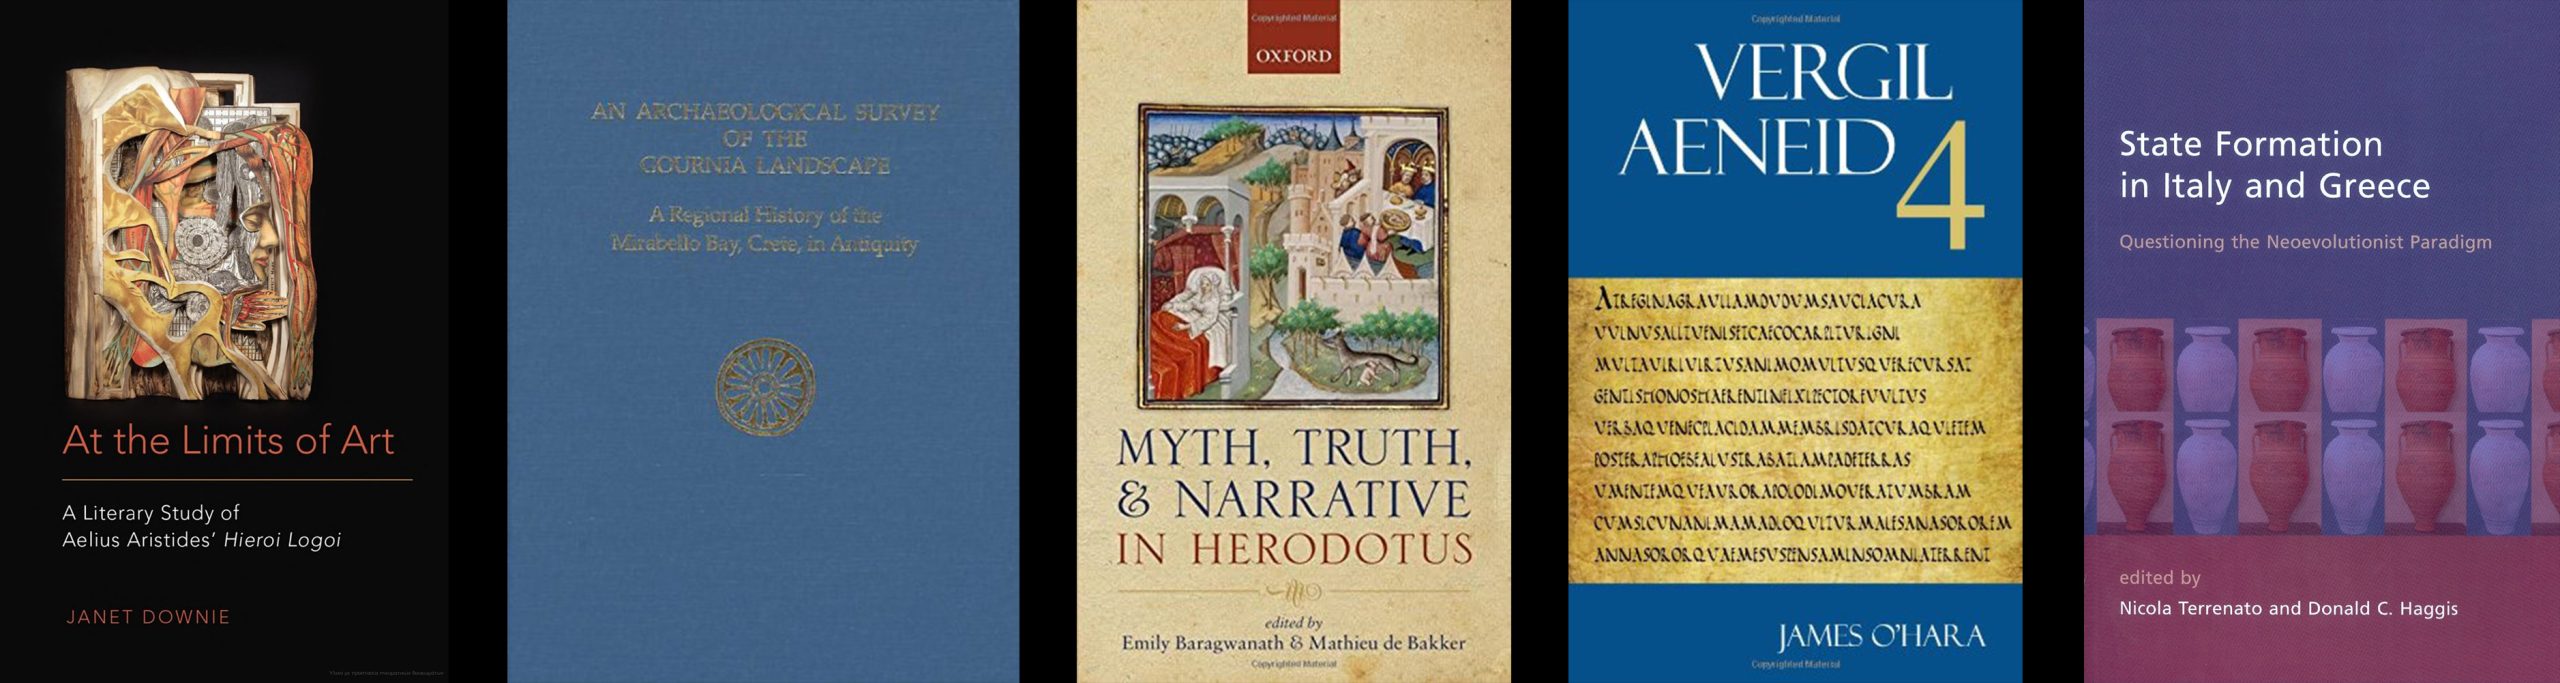 First Book: At the Limits of Art: A Literary Study of Aelius Aristides' Hieroi Logoi, Janet Downie. Second Book: An Archaeological Survey of the Gournia Landscape: A Regional History of the Mirabello Bay, Crete, in Antiquity. Third Book: Myth, Truth, and Narrative in Herodotus, edited by Emily Baragwanath and Mathieu de Bakker. Fourth Book: Vergil Aeneid volume four, James O'Hara. Fifth Book: State Formation in Italy and Greece: Questioning the Neoevolutionist Paradigm, edited by Nicola terrenato and Donald C. Haggis.